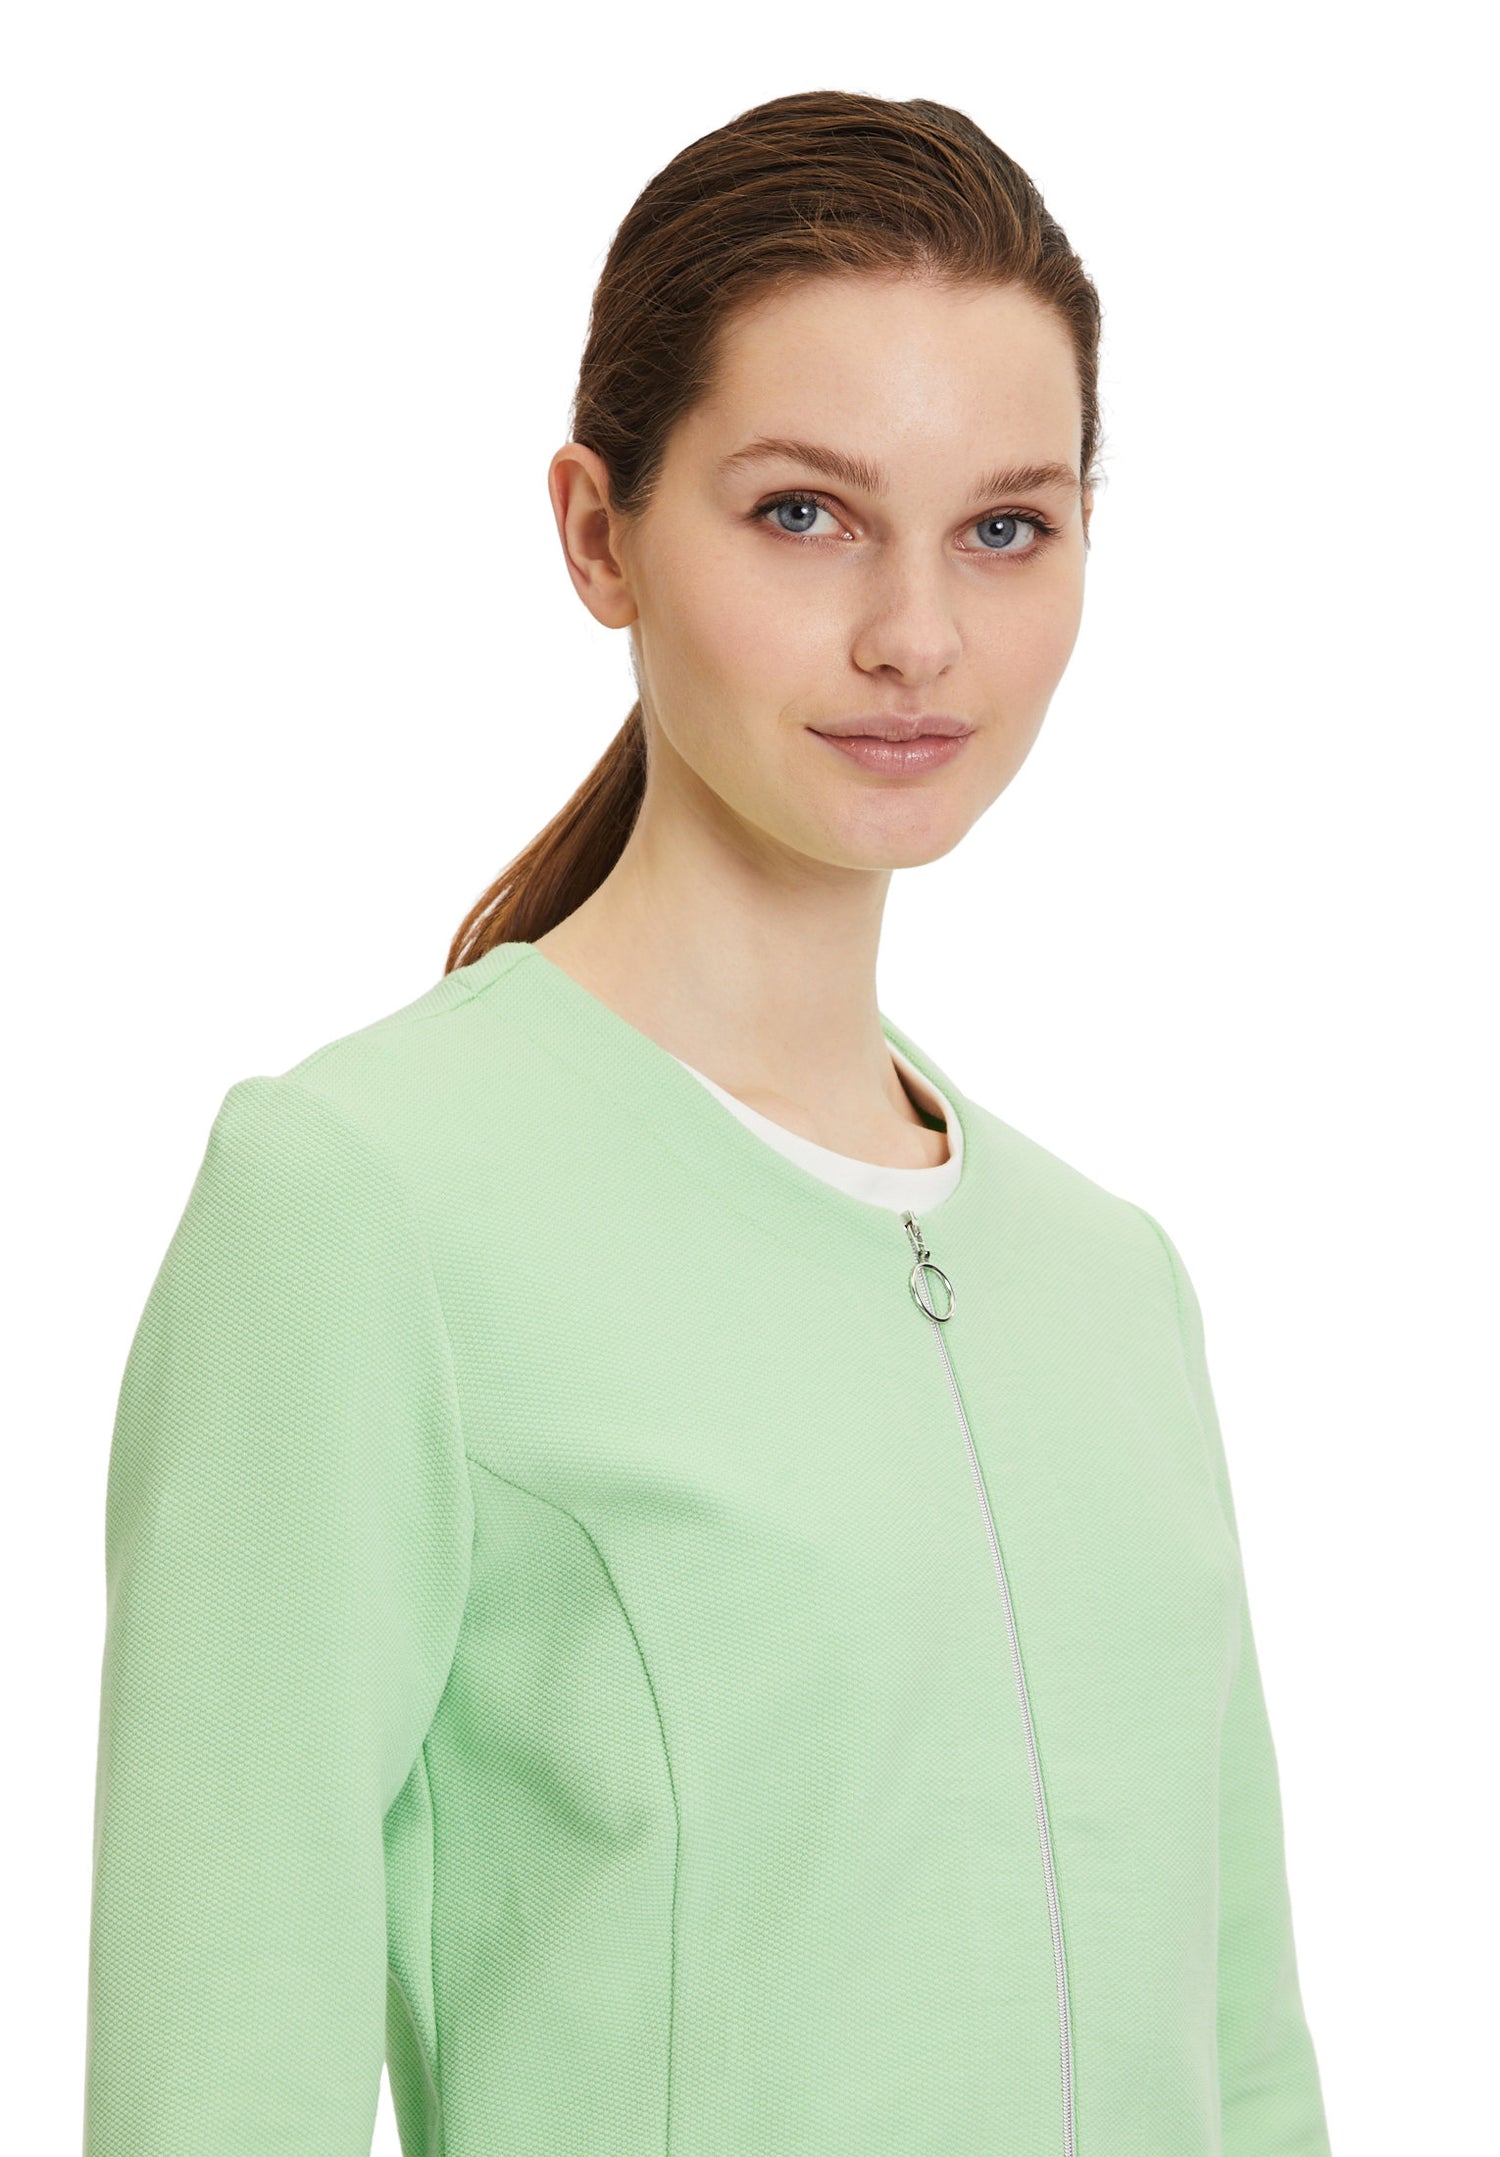 Pastel Green Fitted Blazer Style Cardigan_4340 1050_5242_06